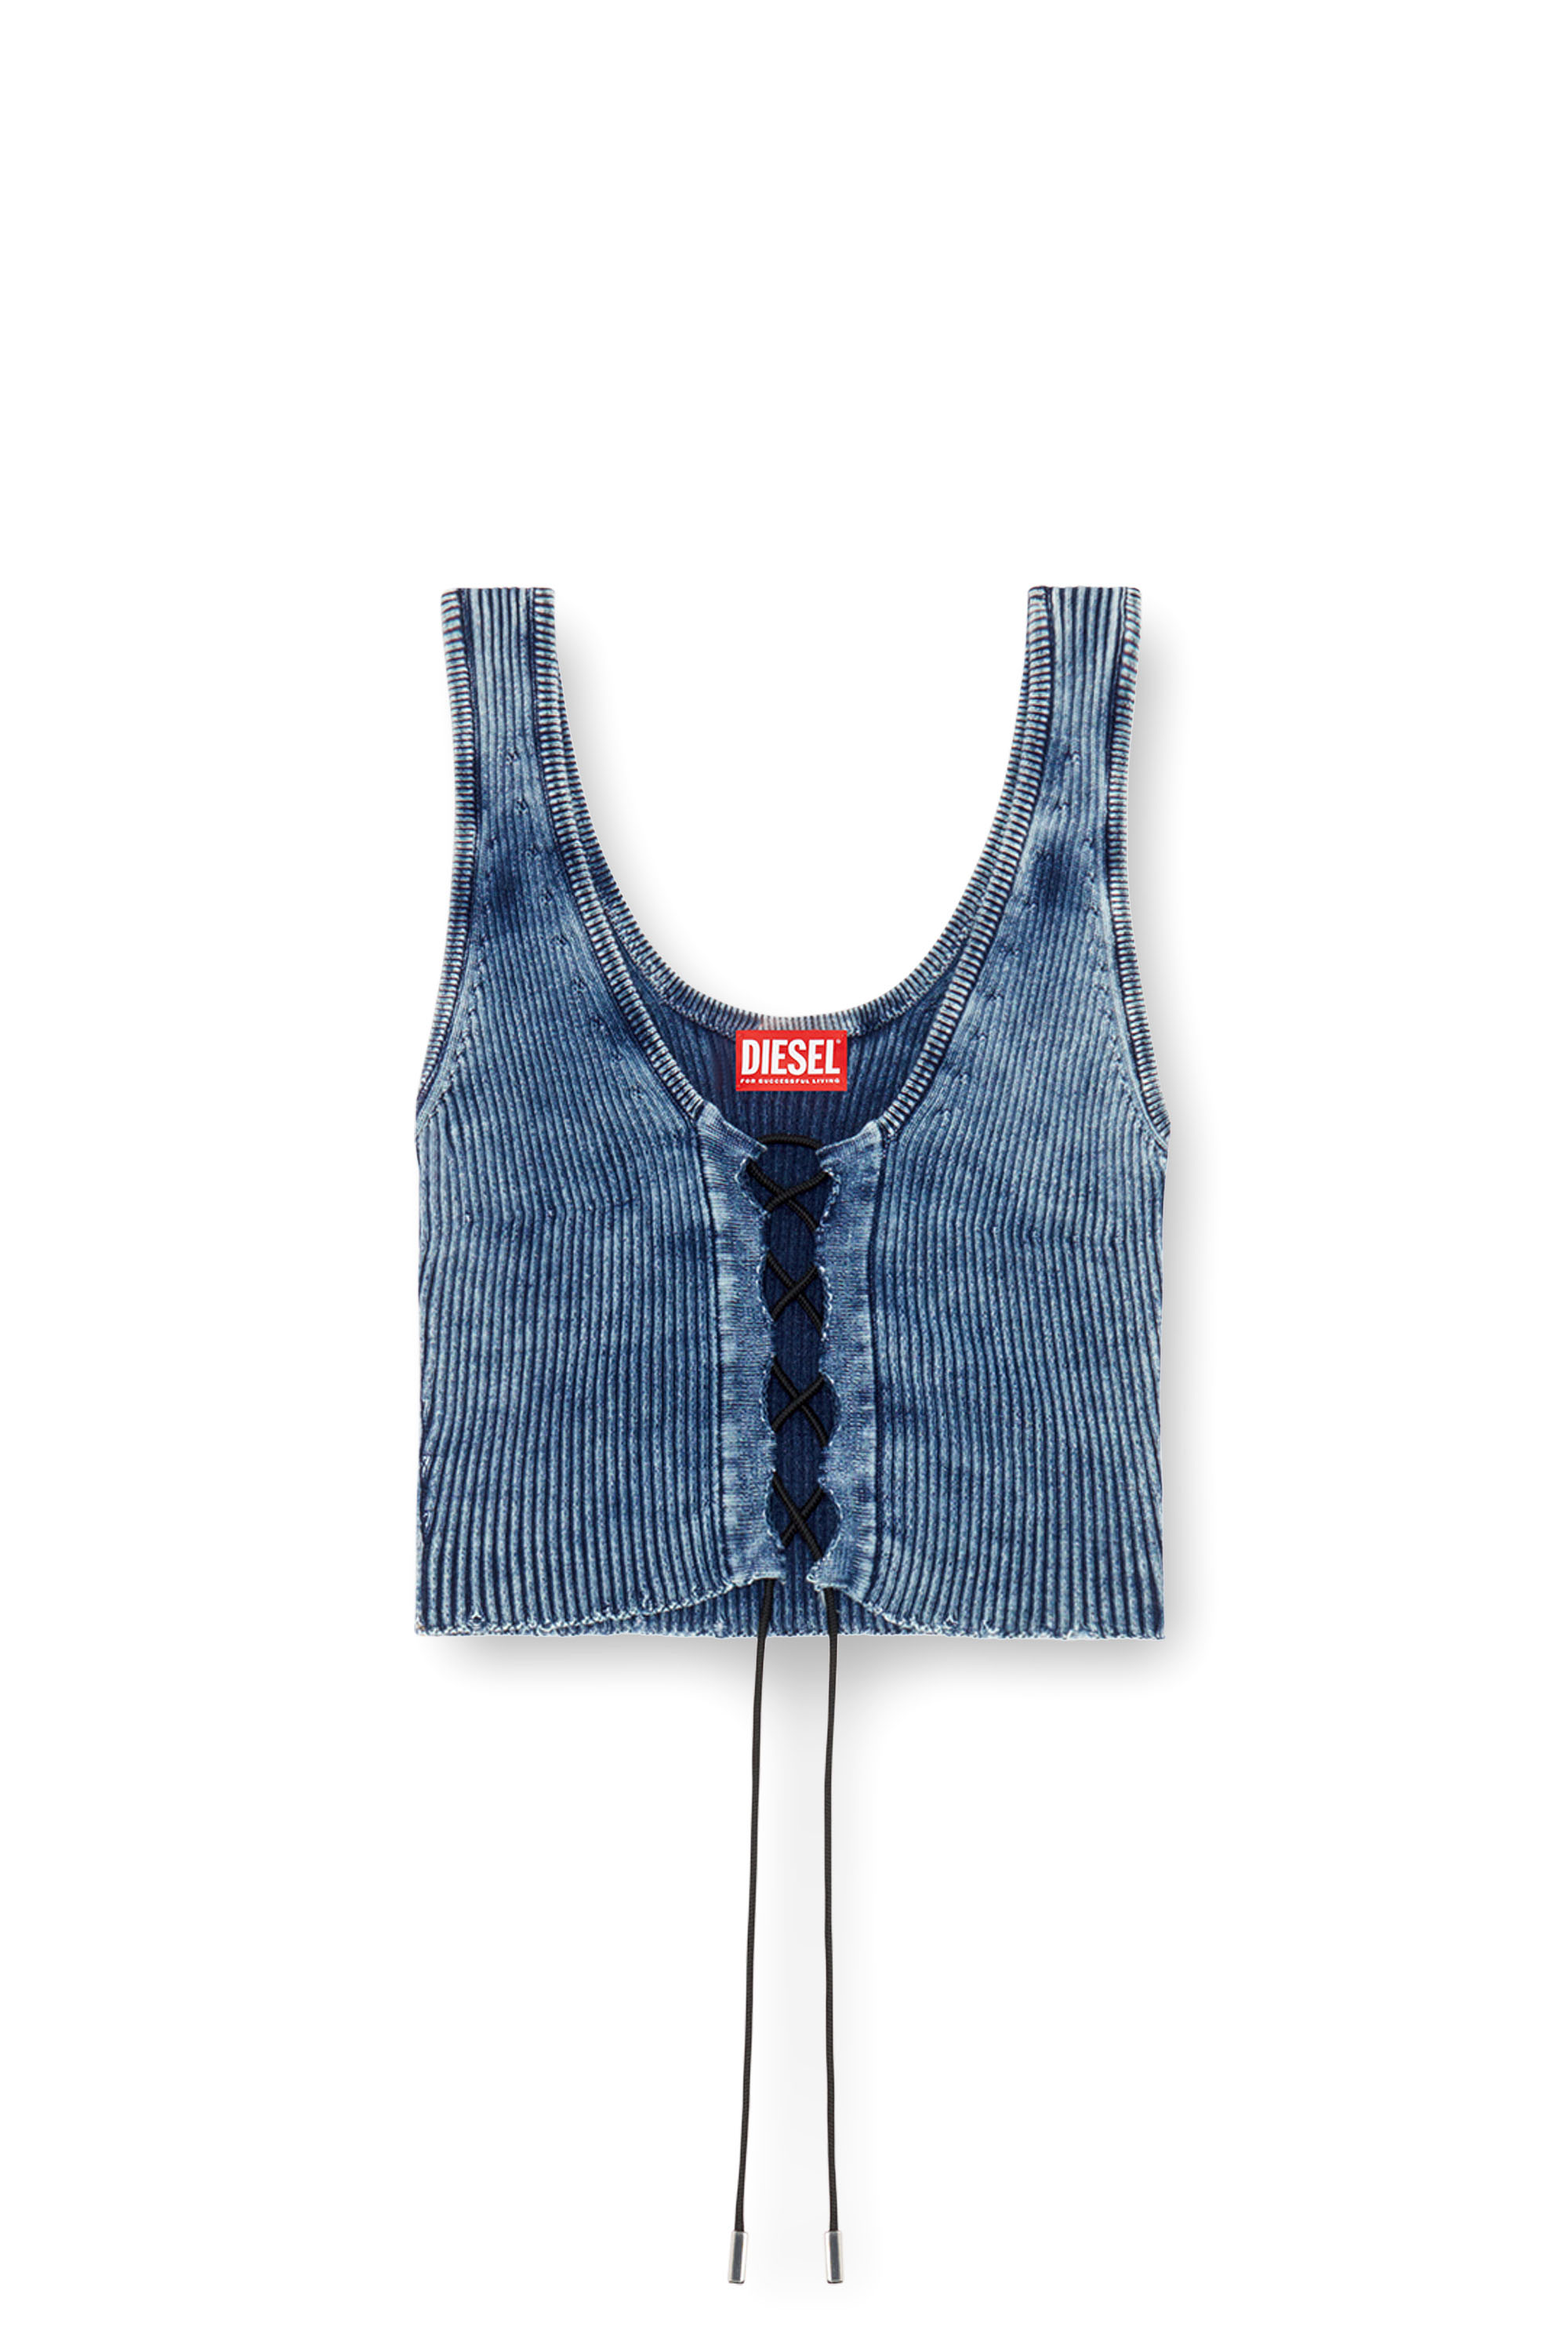 Diesel - M-ADONE, Female Cropped lace-up tank top in indigo knit in ブルー - Image 5